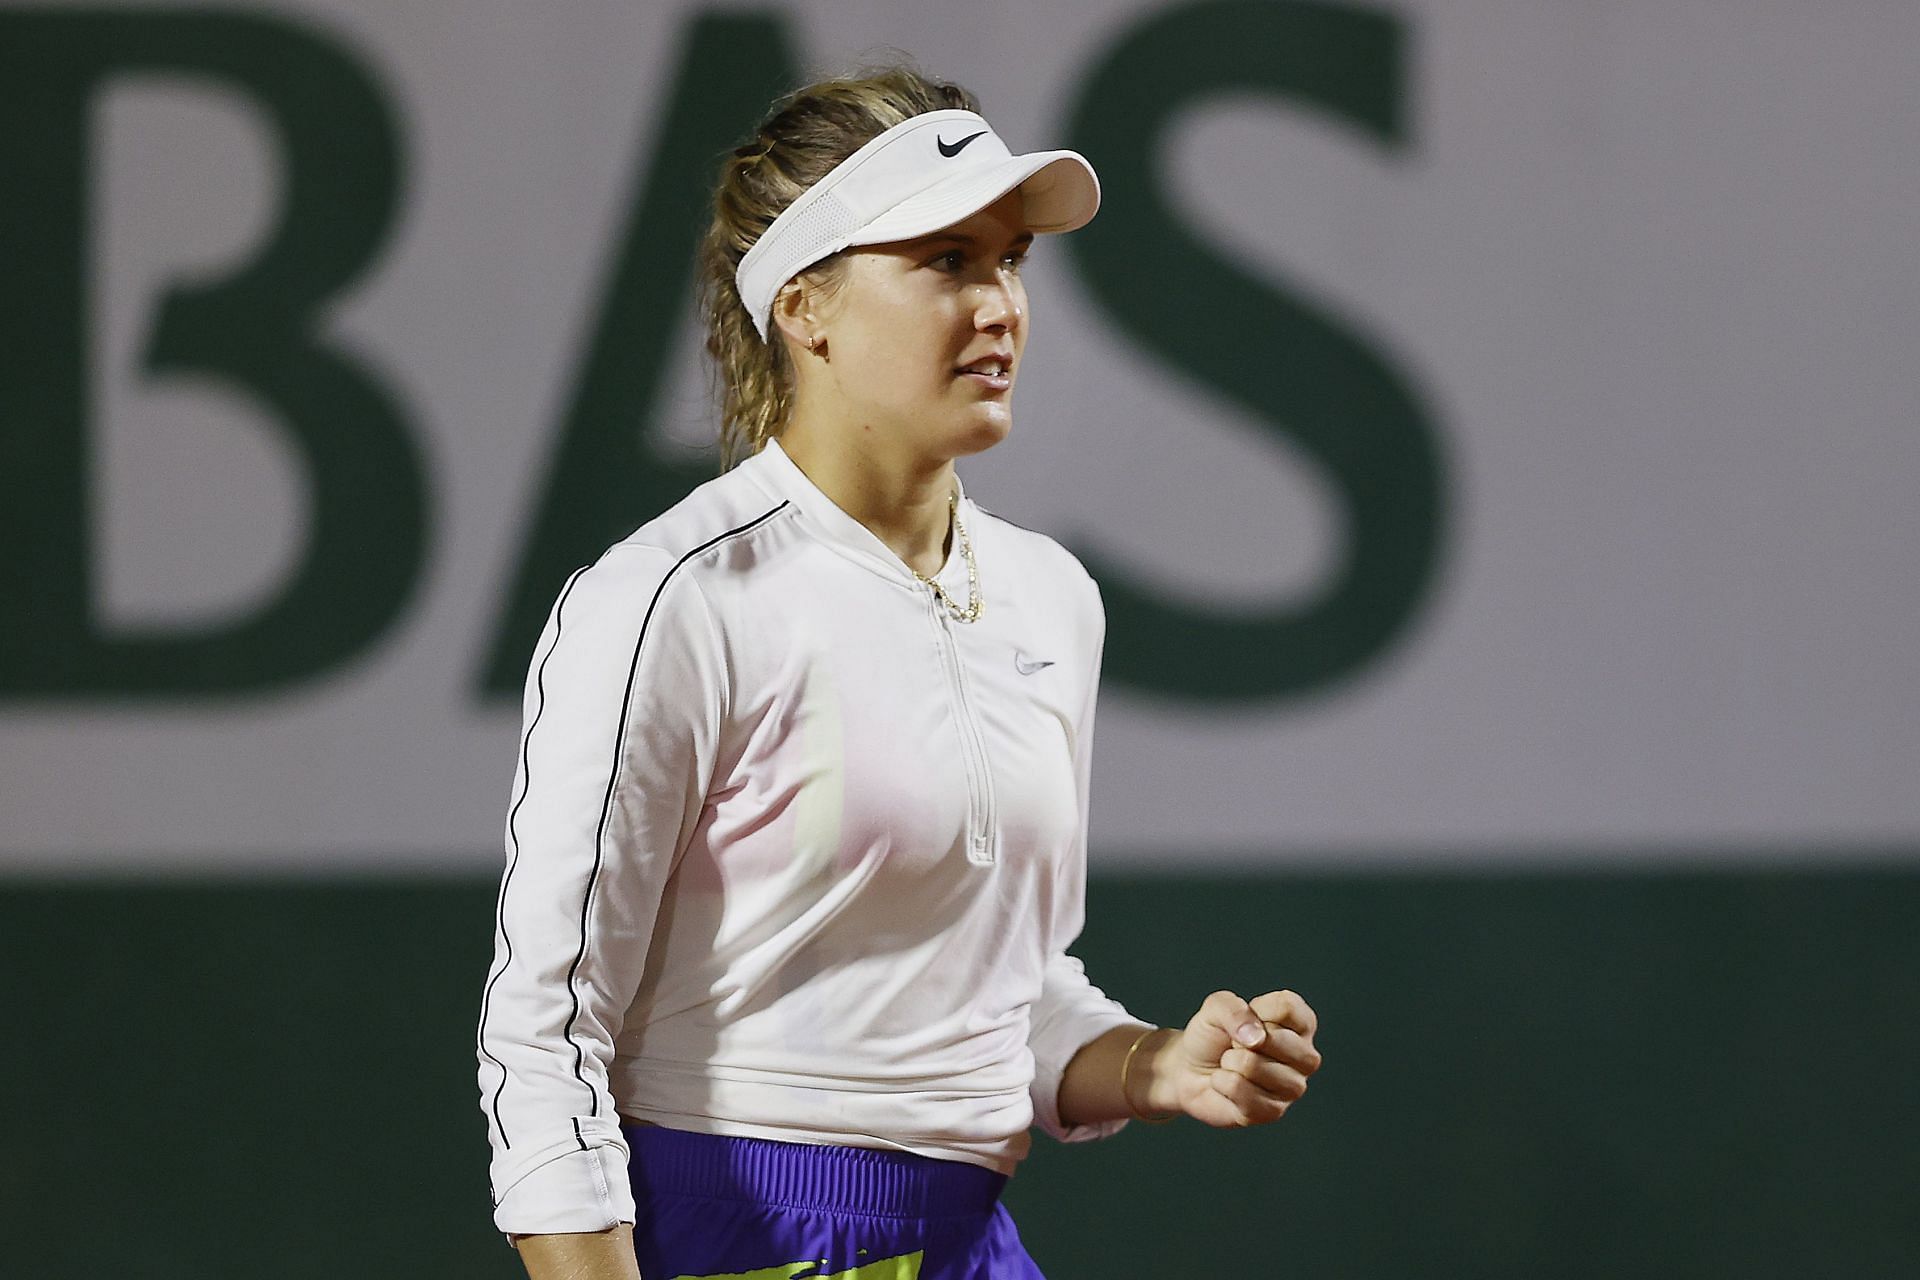 Bouchard was given a wildcard into the main draw of the 2022 Transylvania Open.